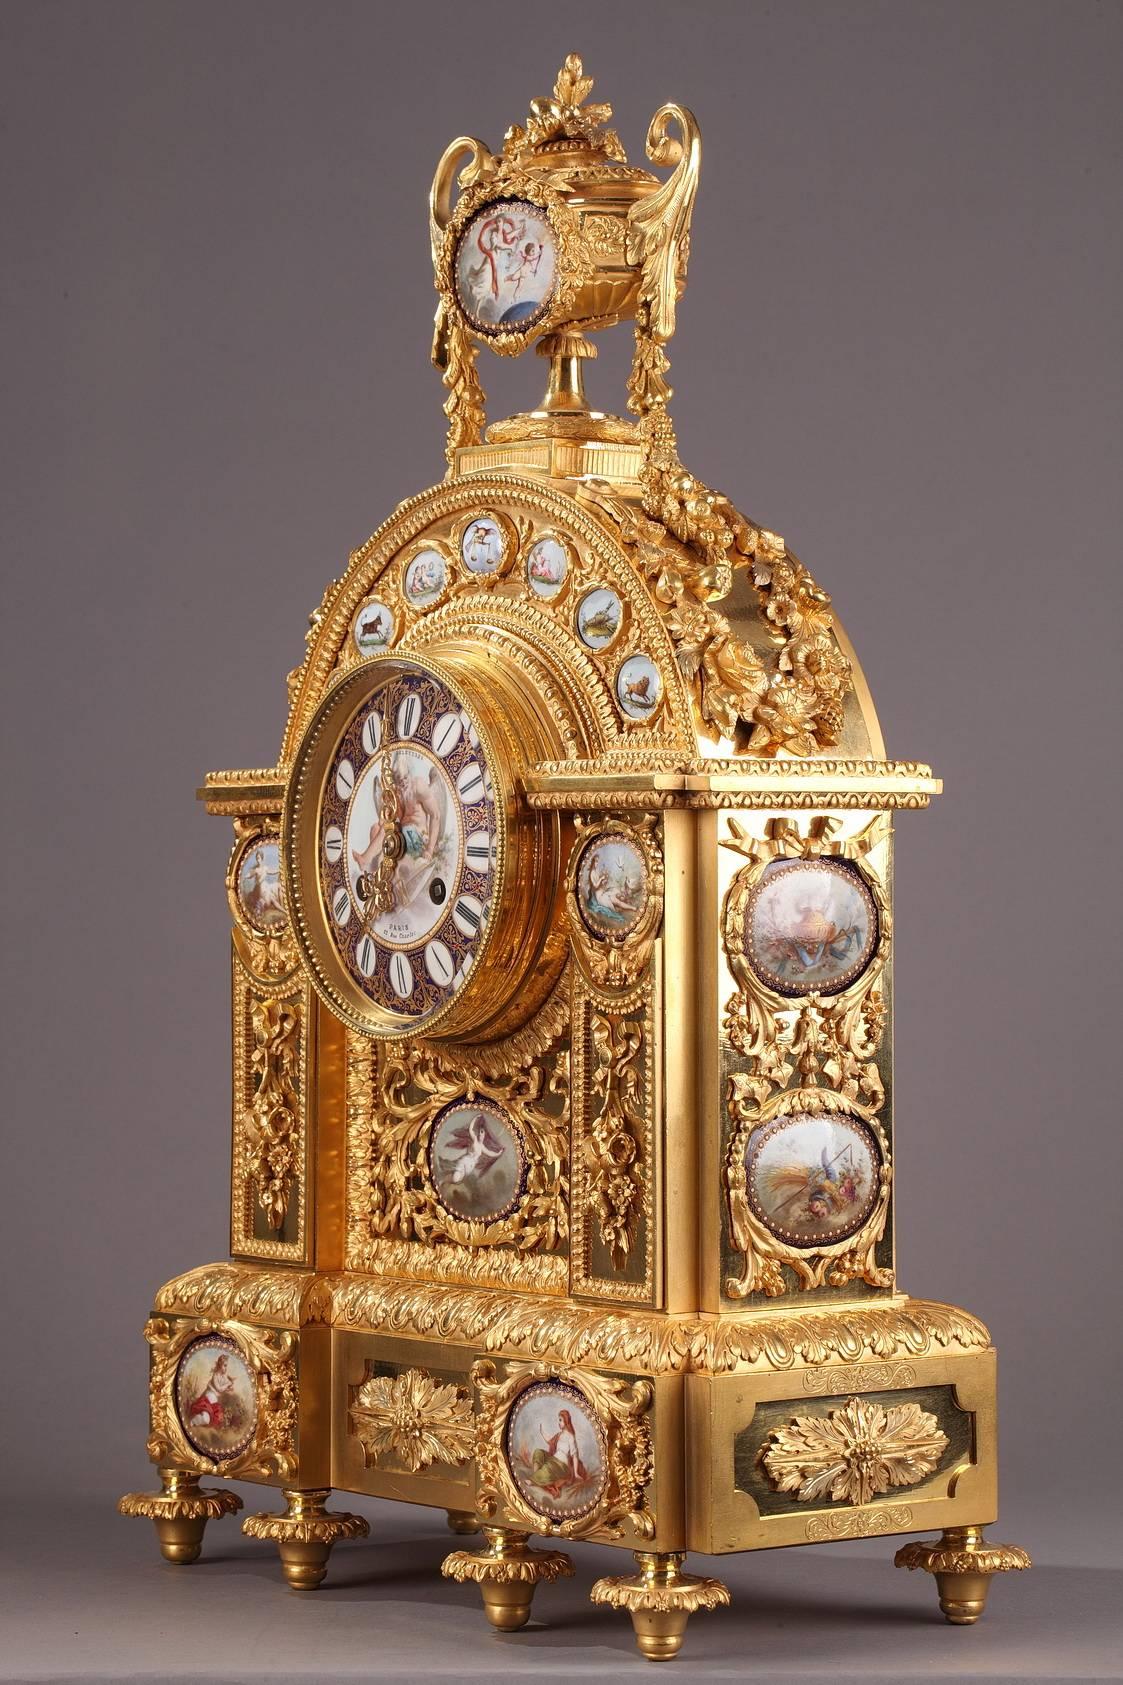 Exceptional mantel clock from the Napoleon III period richly decorated with gilt bronze foliage, garlands, ovals, and ribbons. Multicolored panels embellished with the signs of the zodiac as well as mythological characters, symbolize the division of